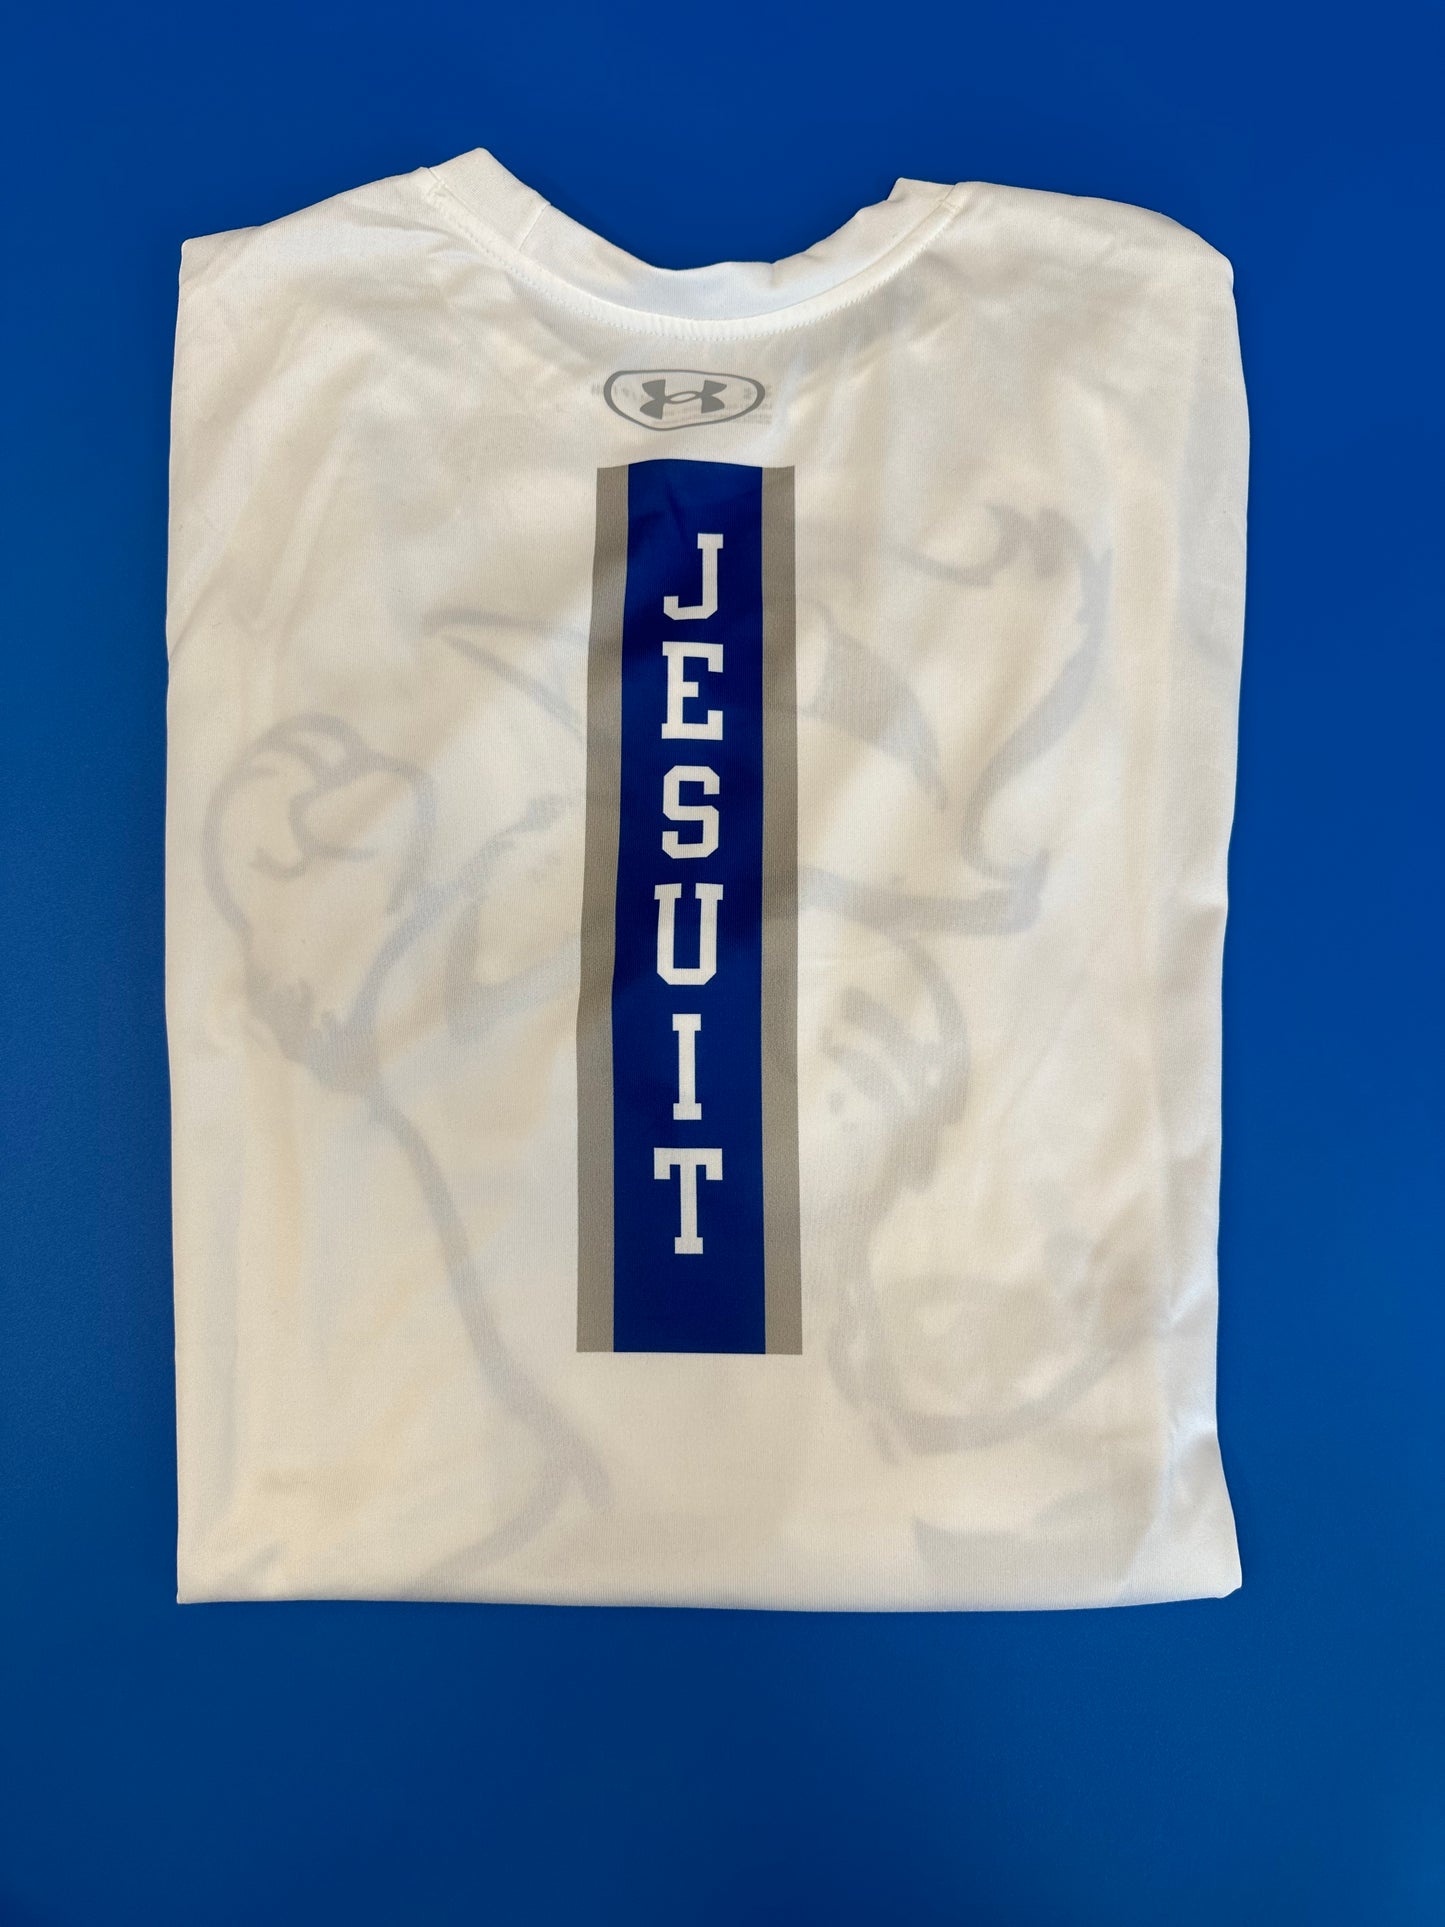 Under Armour.  100% Polyester.  Performance Fabric.  Jayson on Front w/JESUIT down center back. 